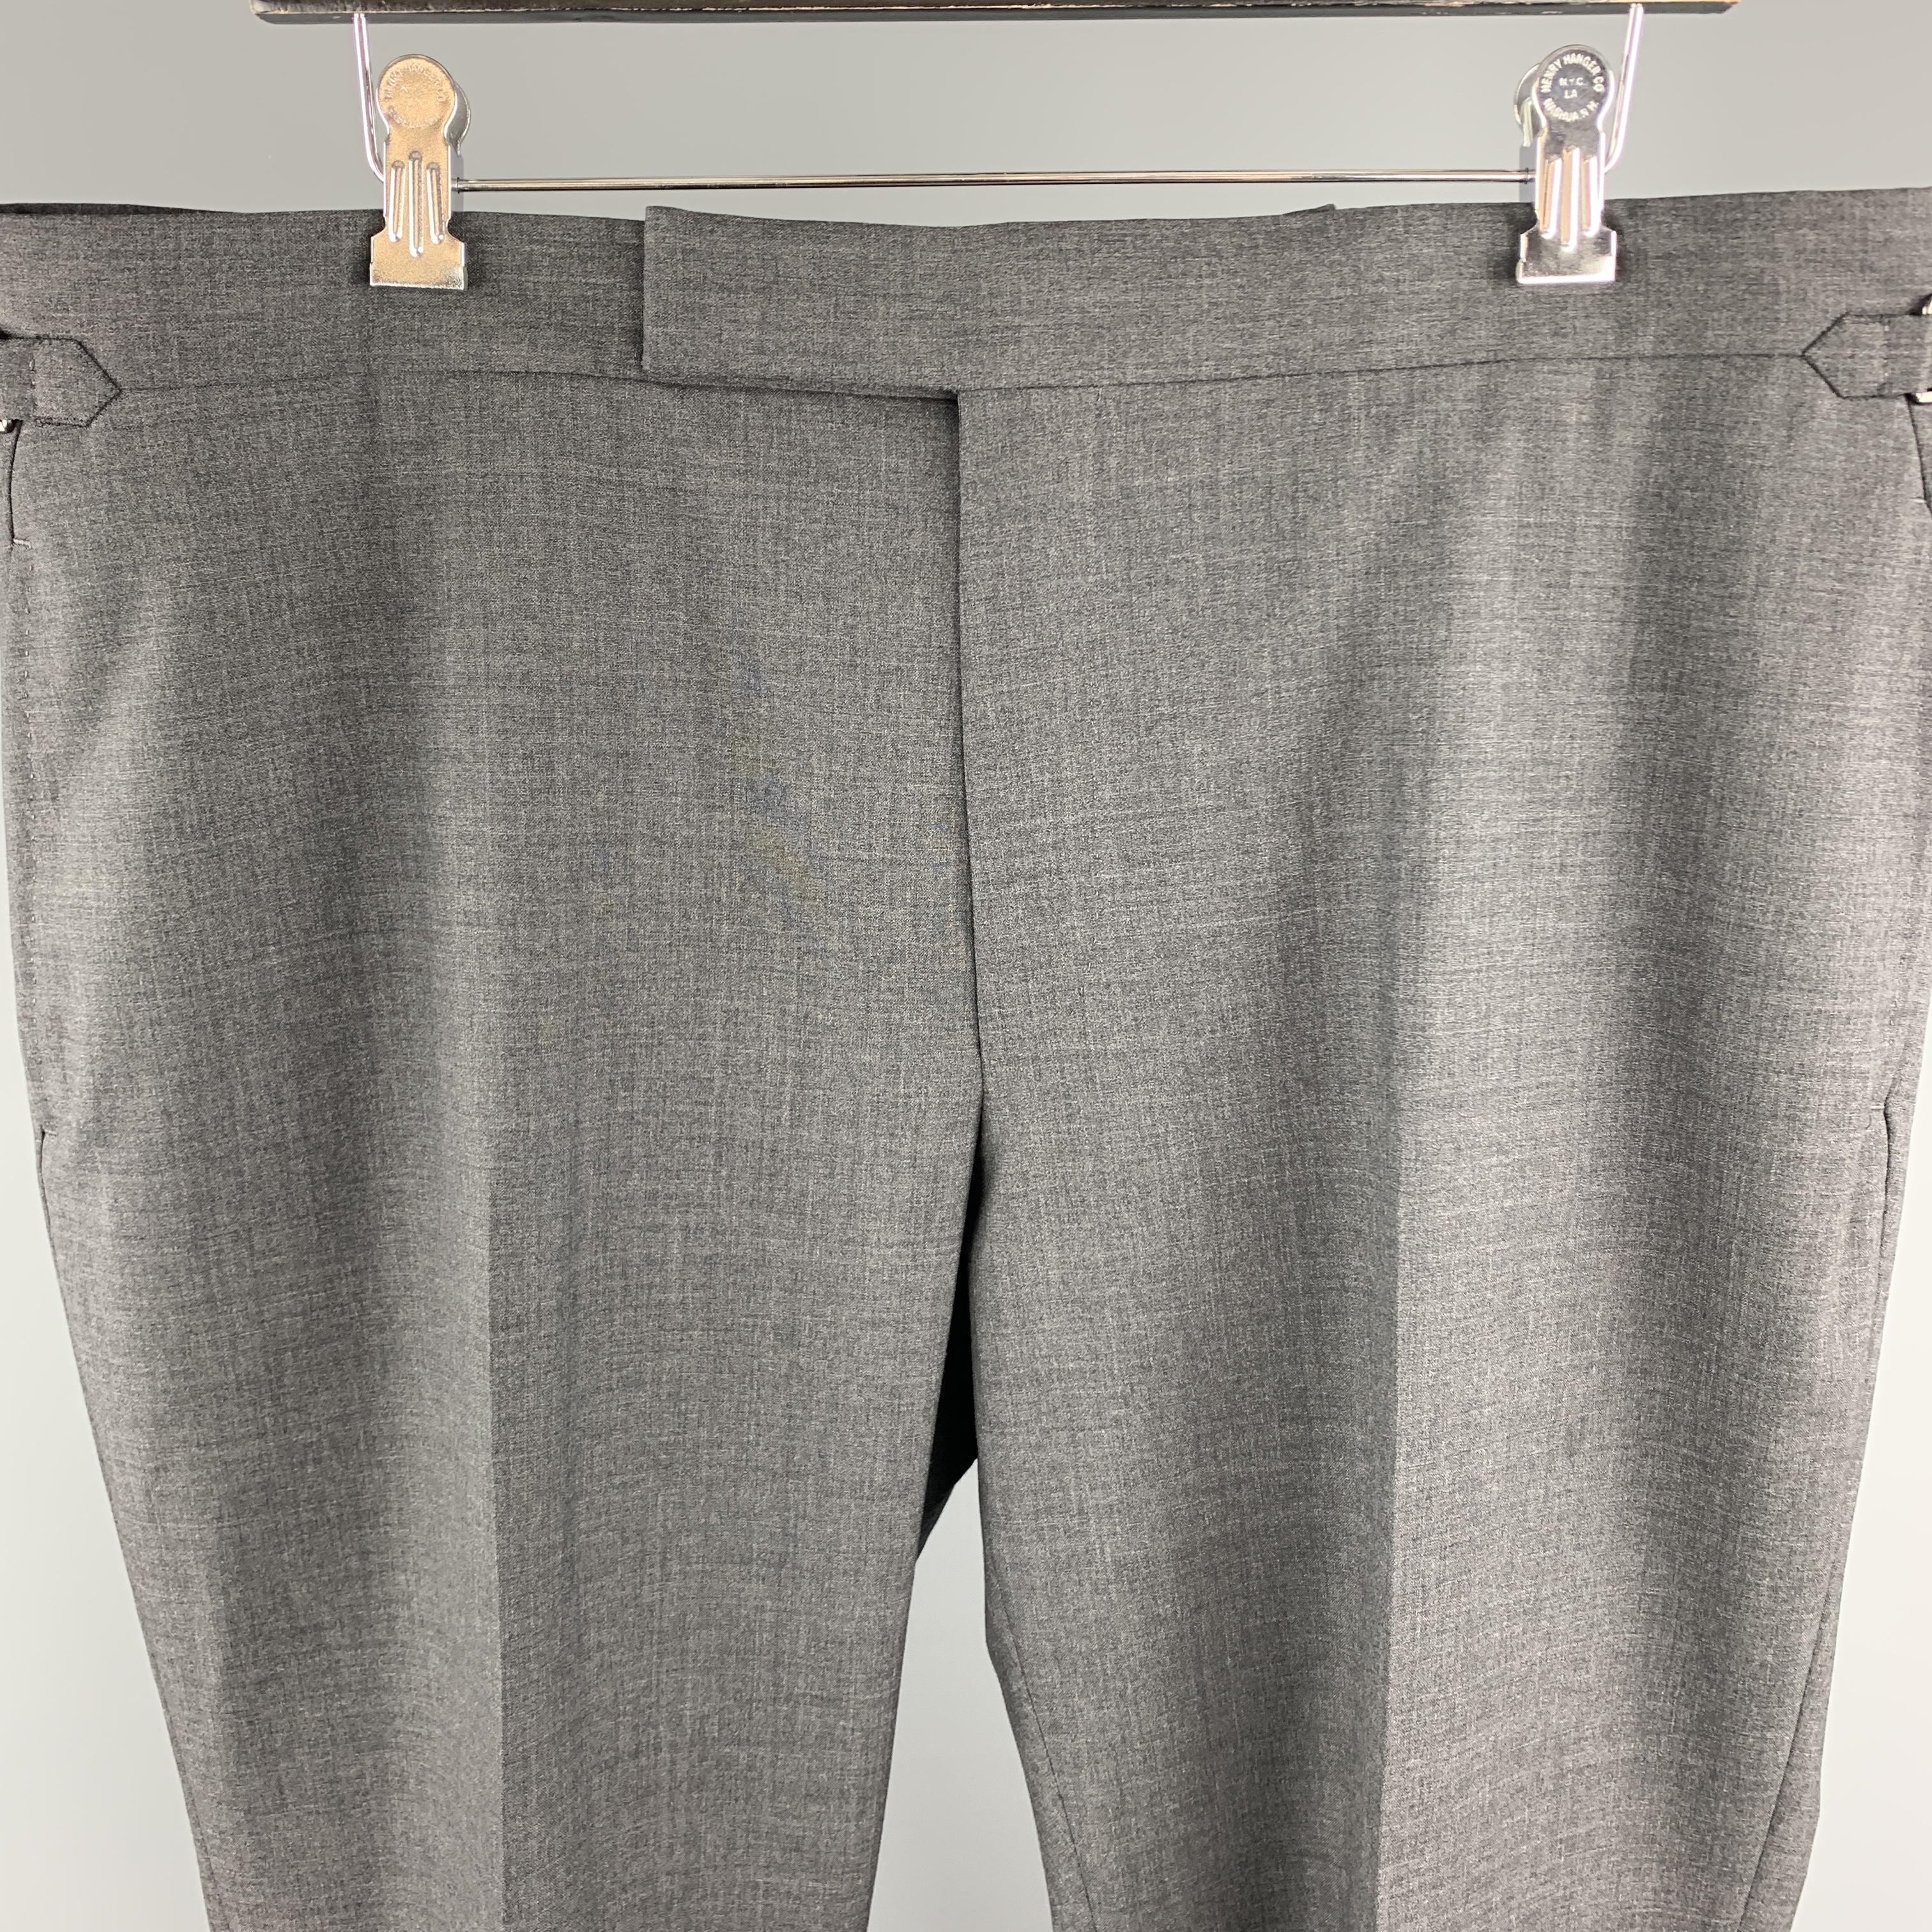 TOM FORD dress pants come in dark heathered gray wool gabardine with a flat front, tab waistband, cuffed hem, and adjustable side tabs. Made in Switzerland.

Excellent Pre-Owned Condition.
Marked: IT 58 R

Measurements:

Waist: 40.5 in.
Rise: 11.5